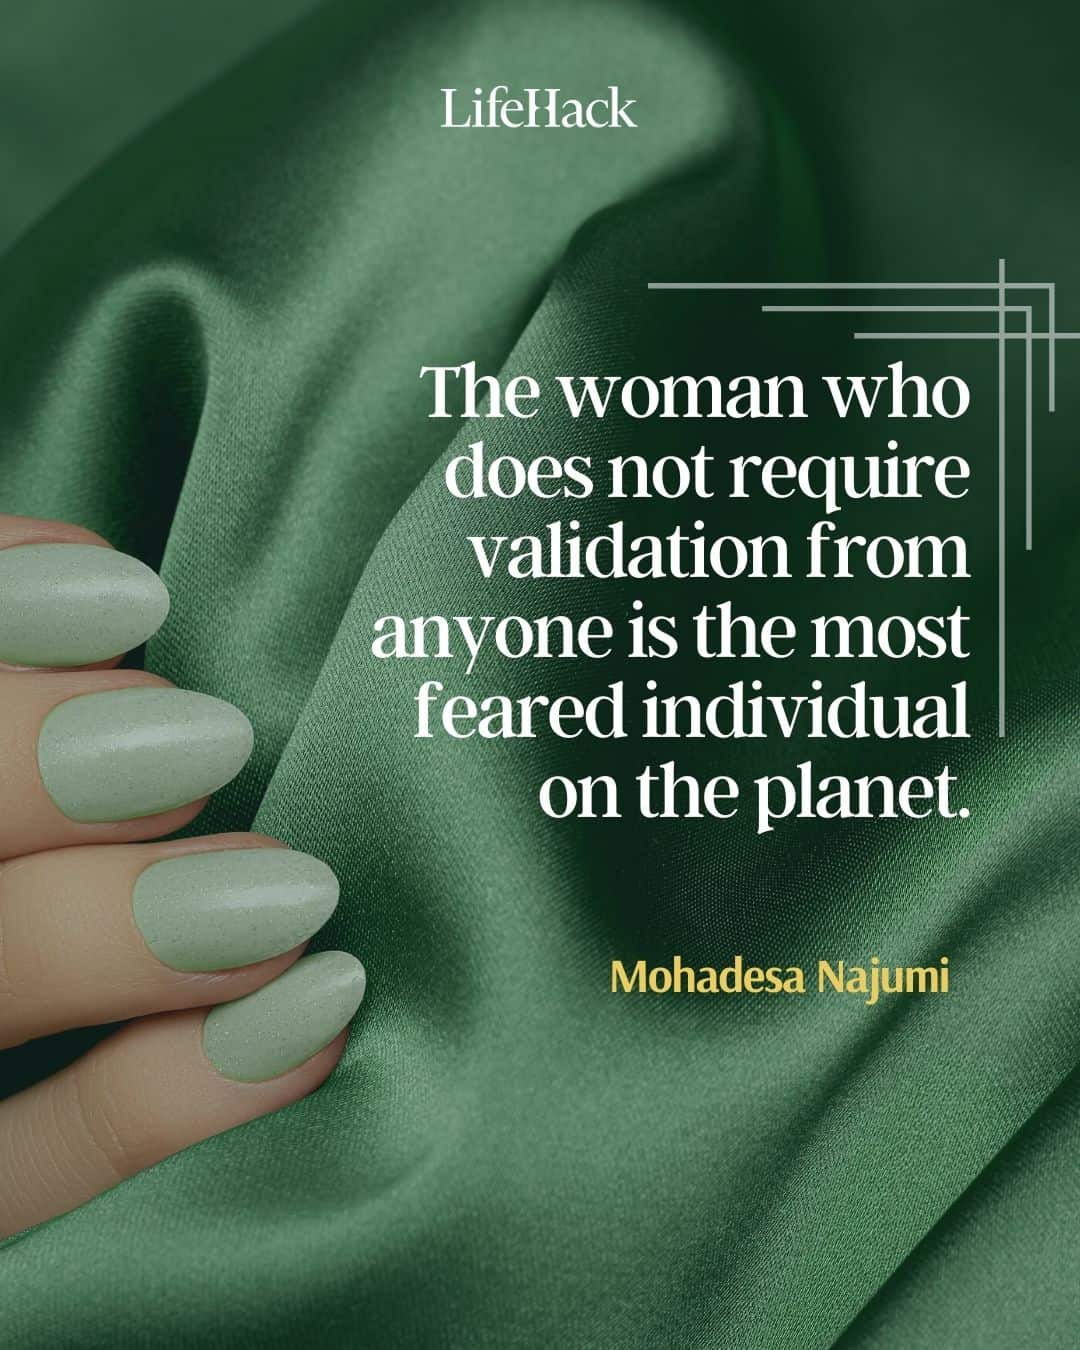 111 Inspirational Quotes Every Woman Should Read